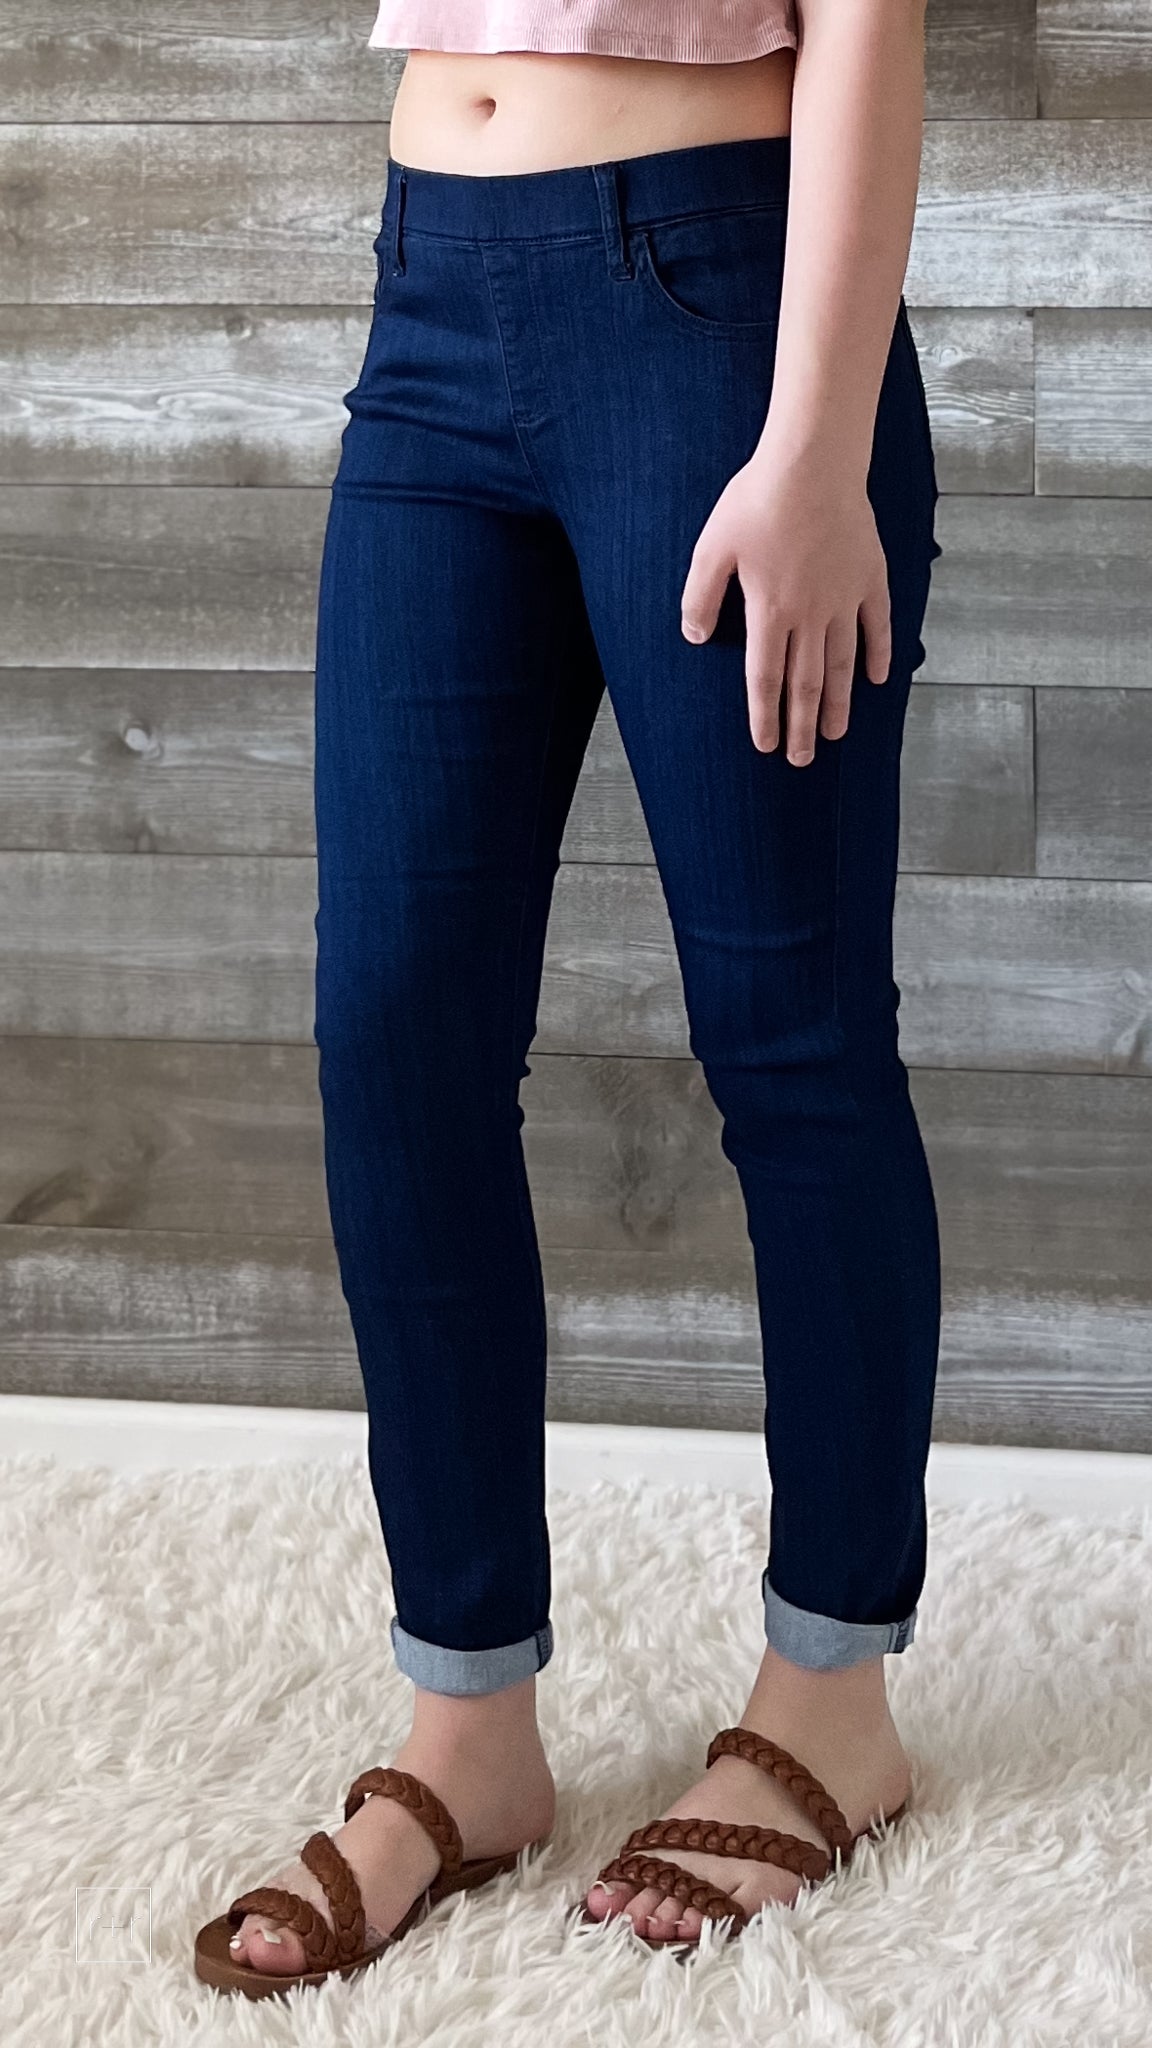 cello jeans pull on skinny crop mid rise jeans with rolled hem in dark denim AB76535R